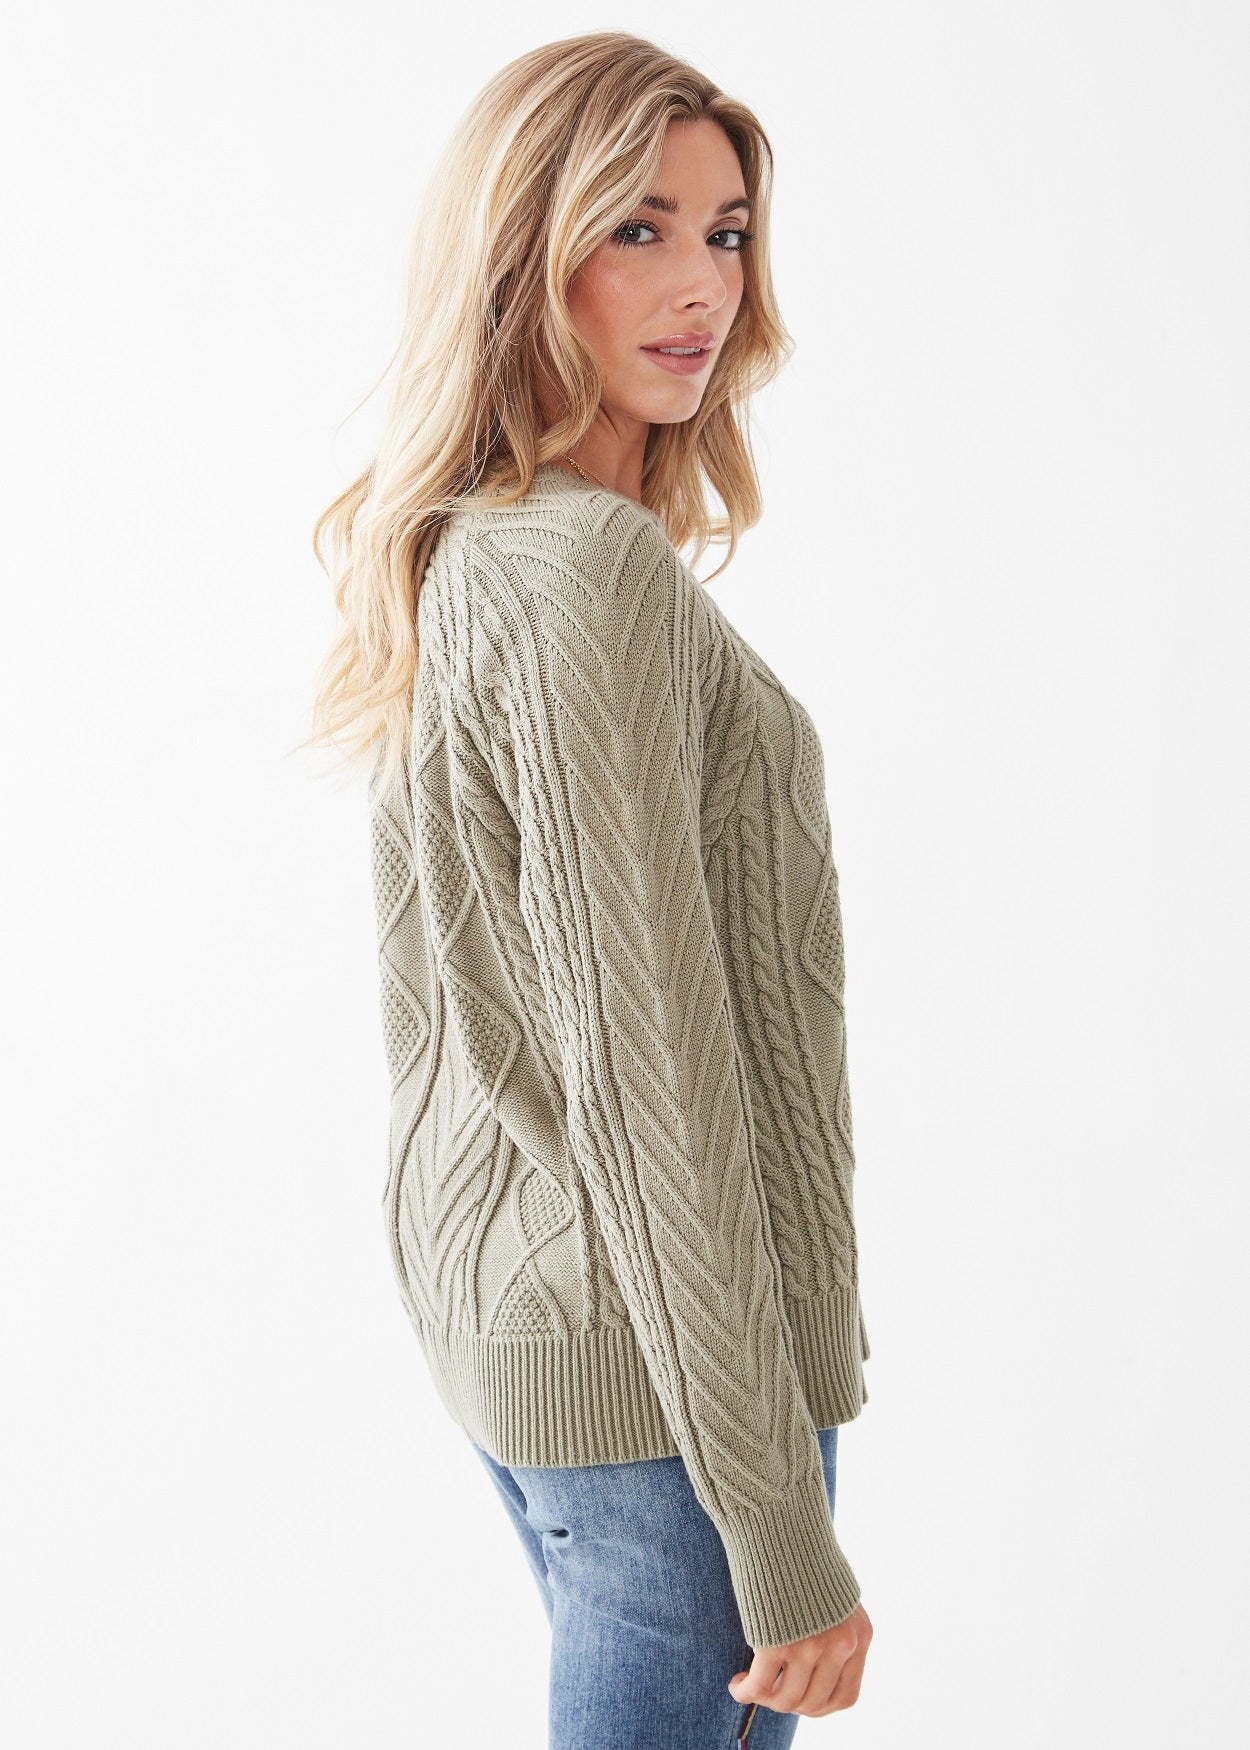 Sage Cable Knit Sweater